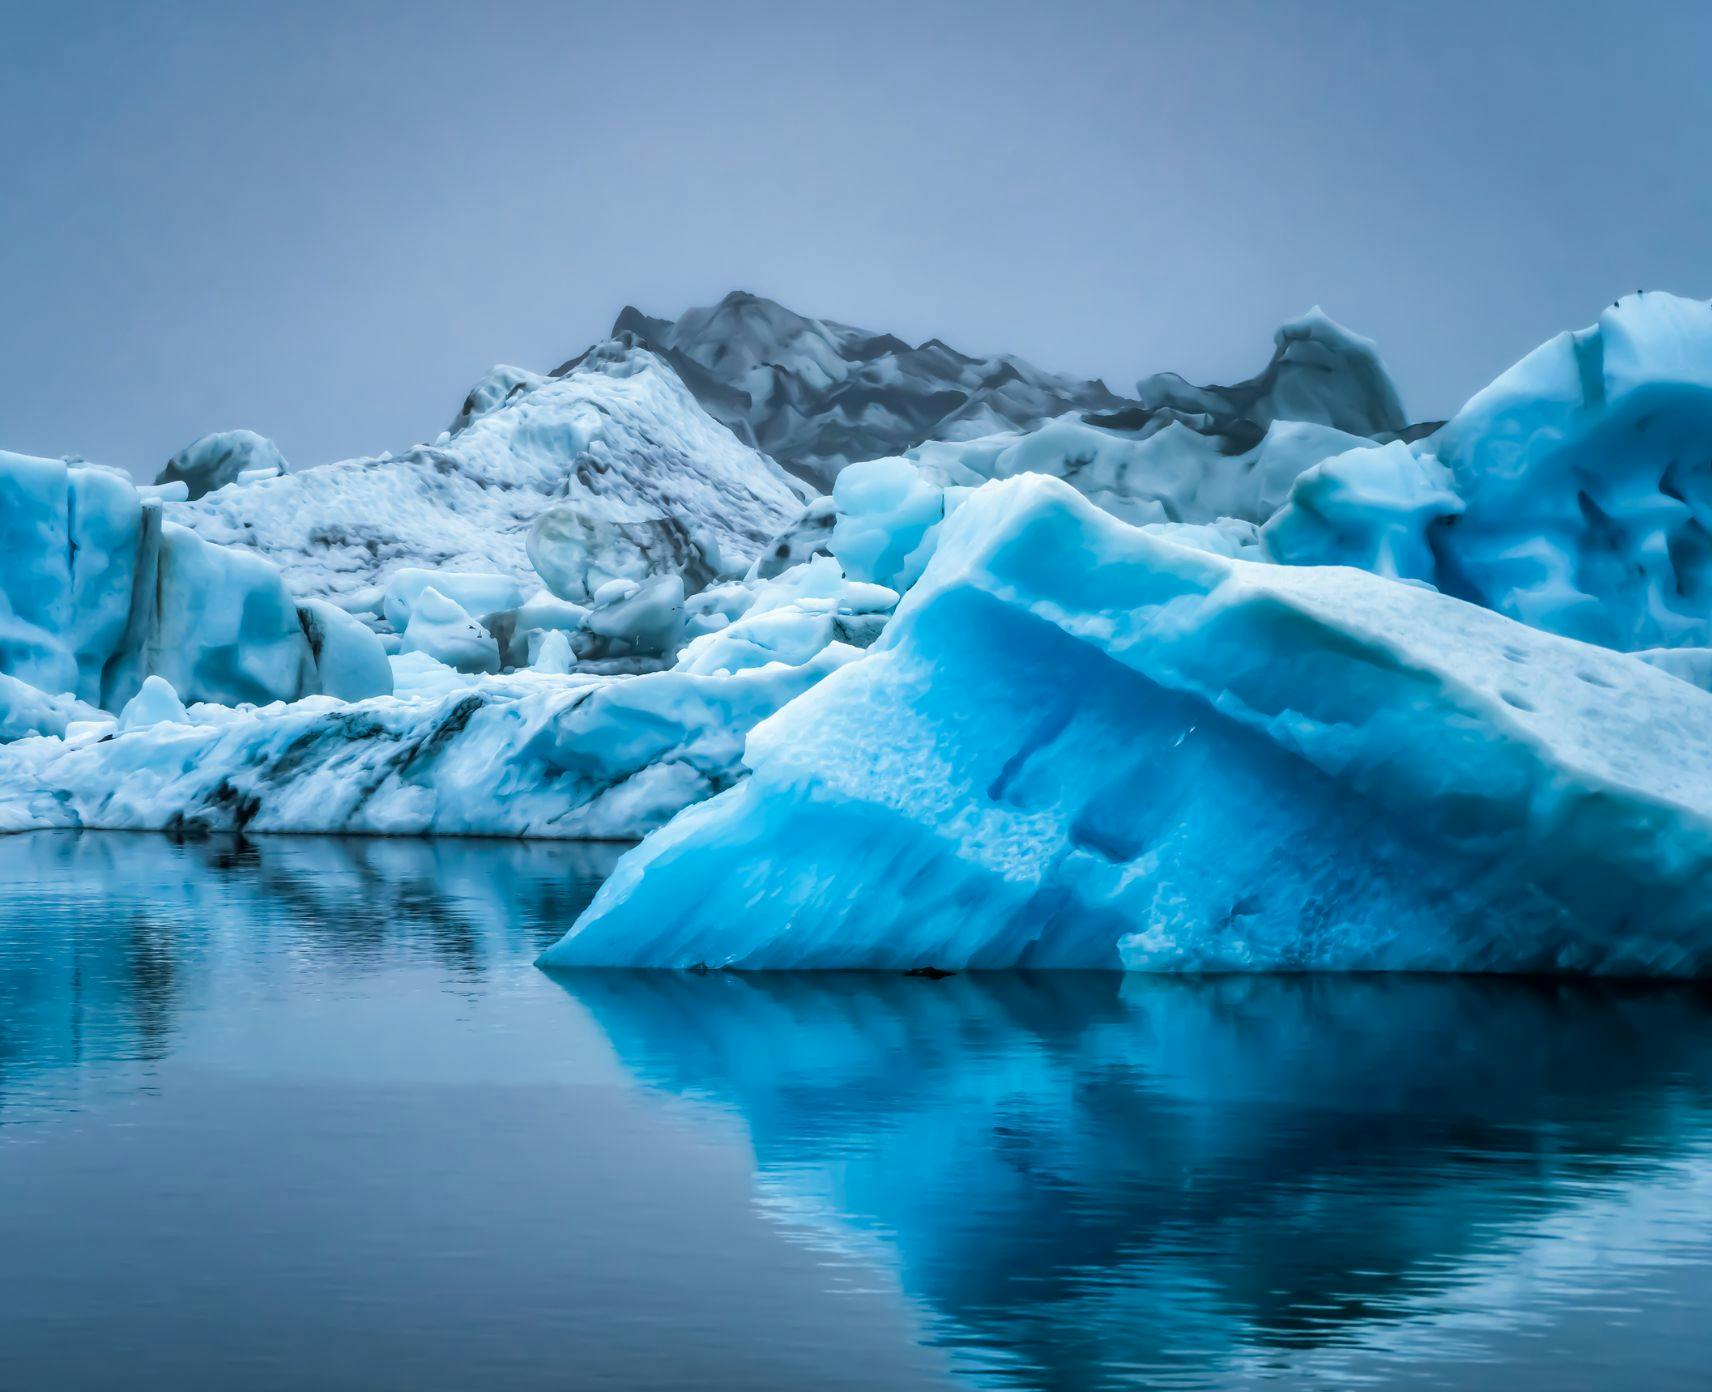 Antartic icebergs in different shades of blue.